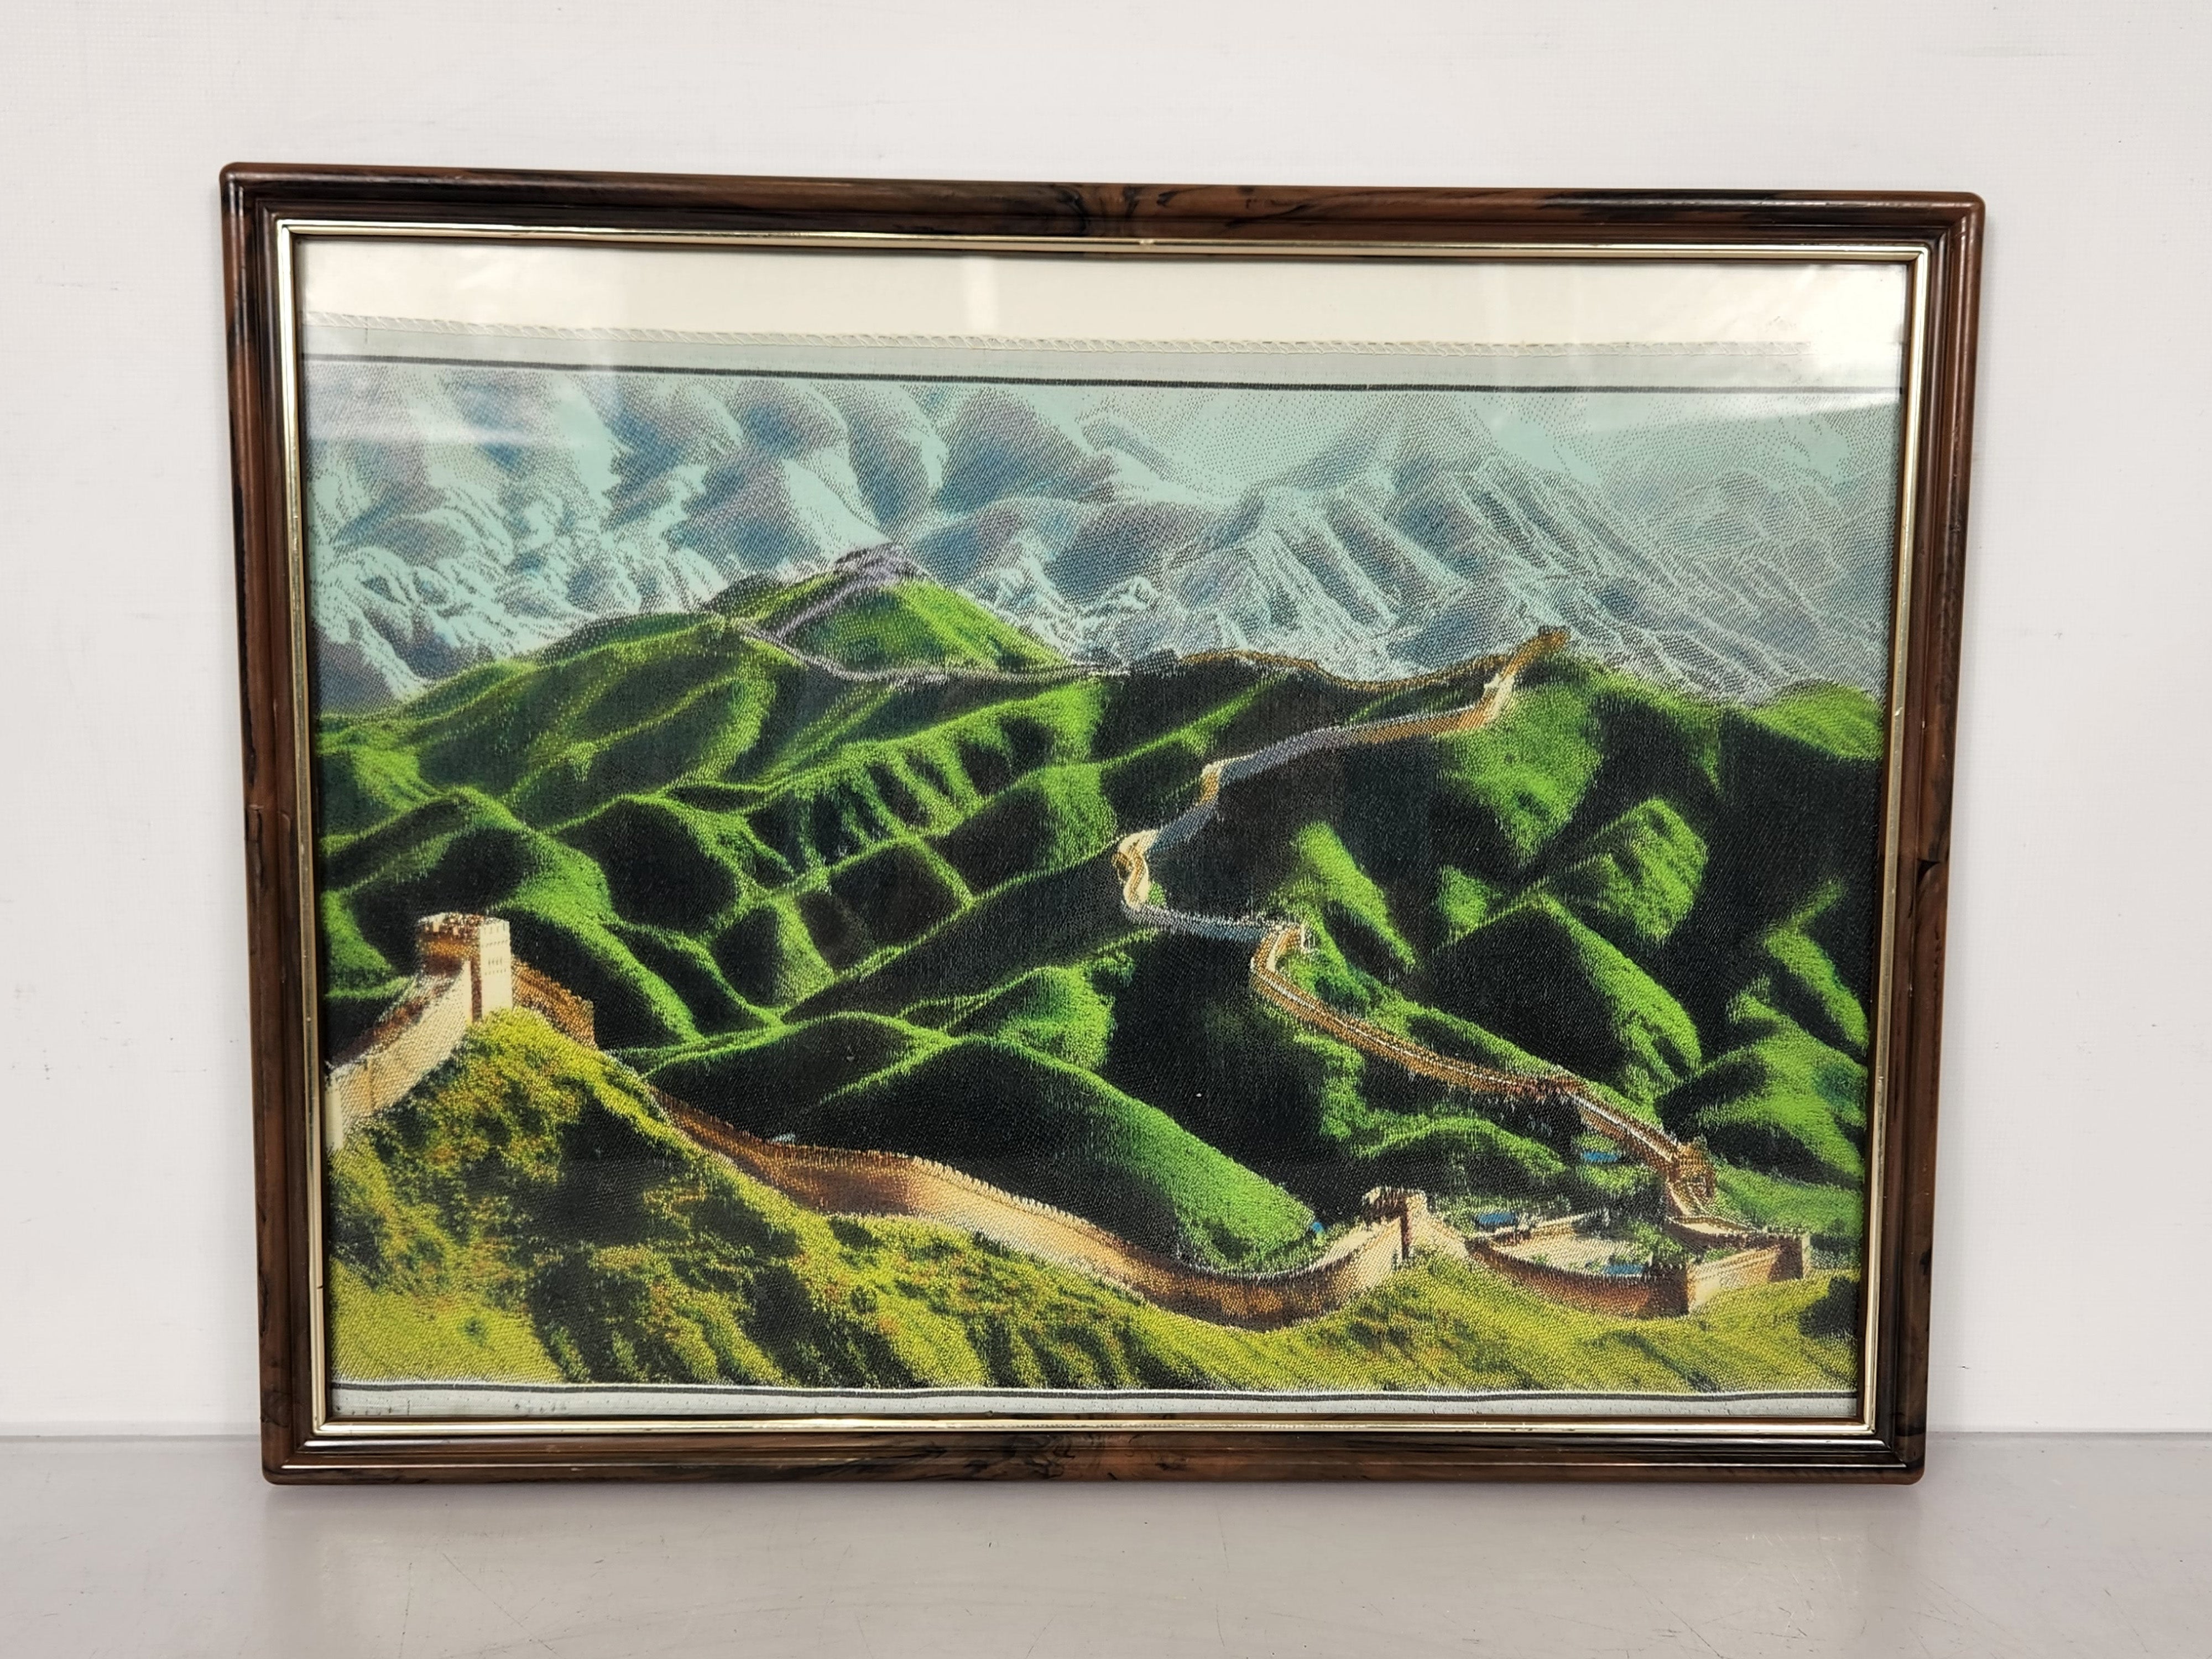 Great Wall of China Tapestry